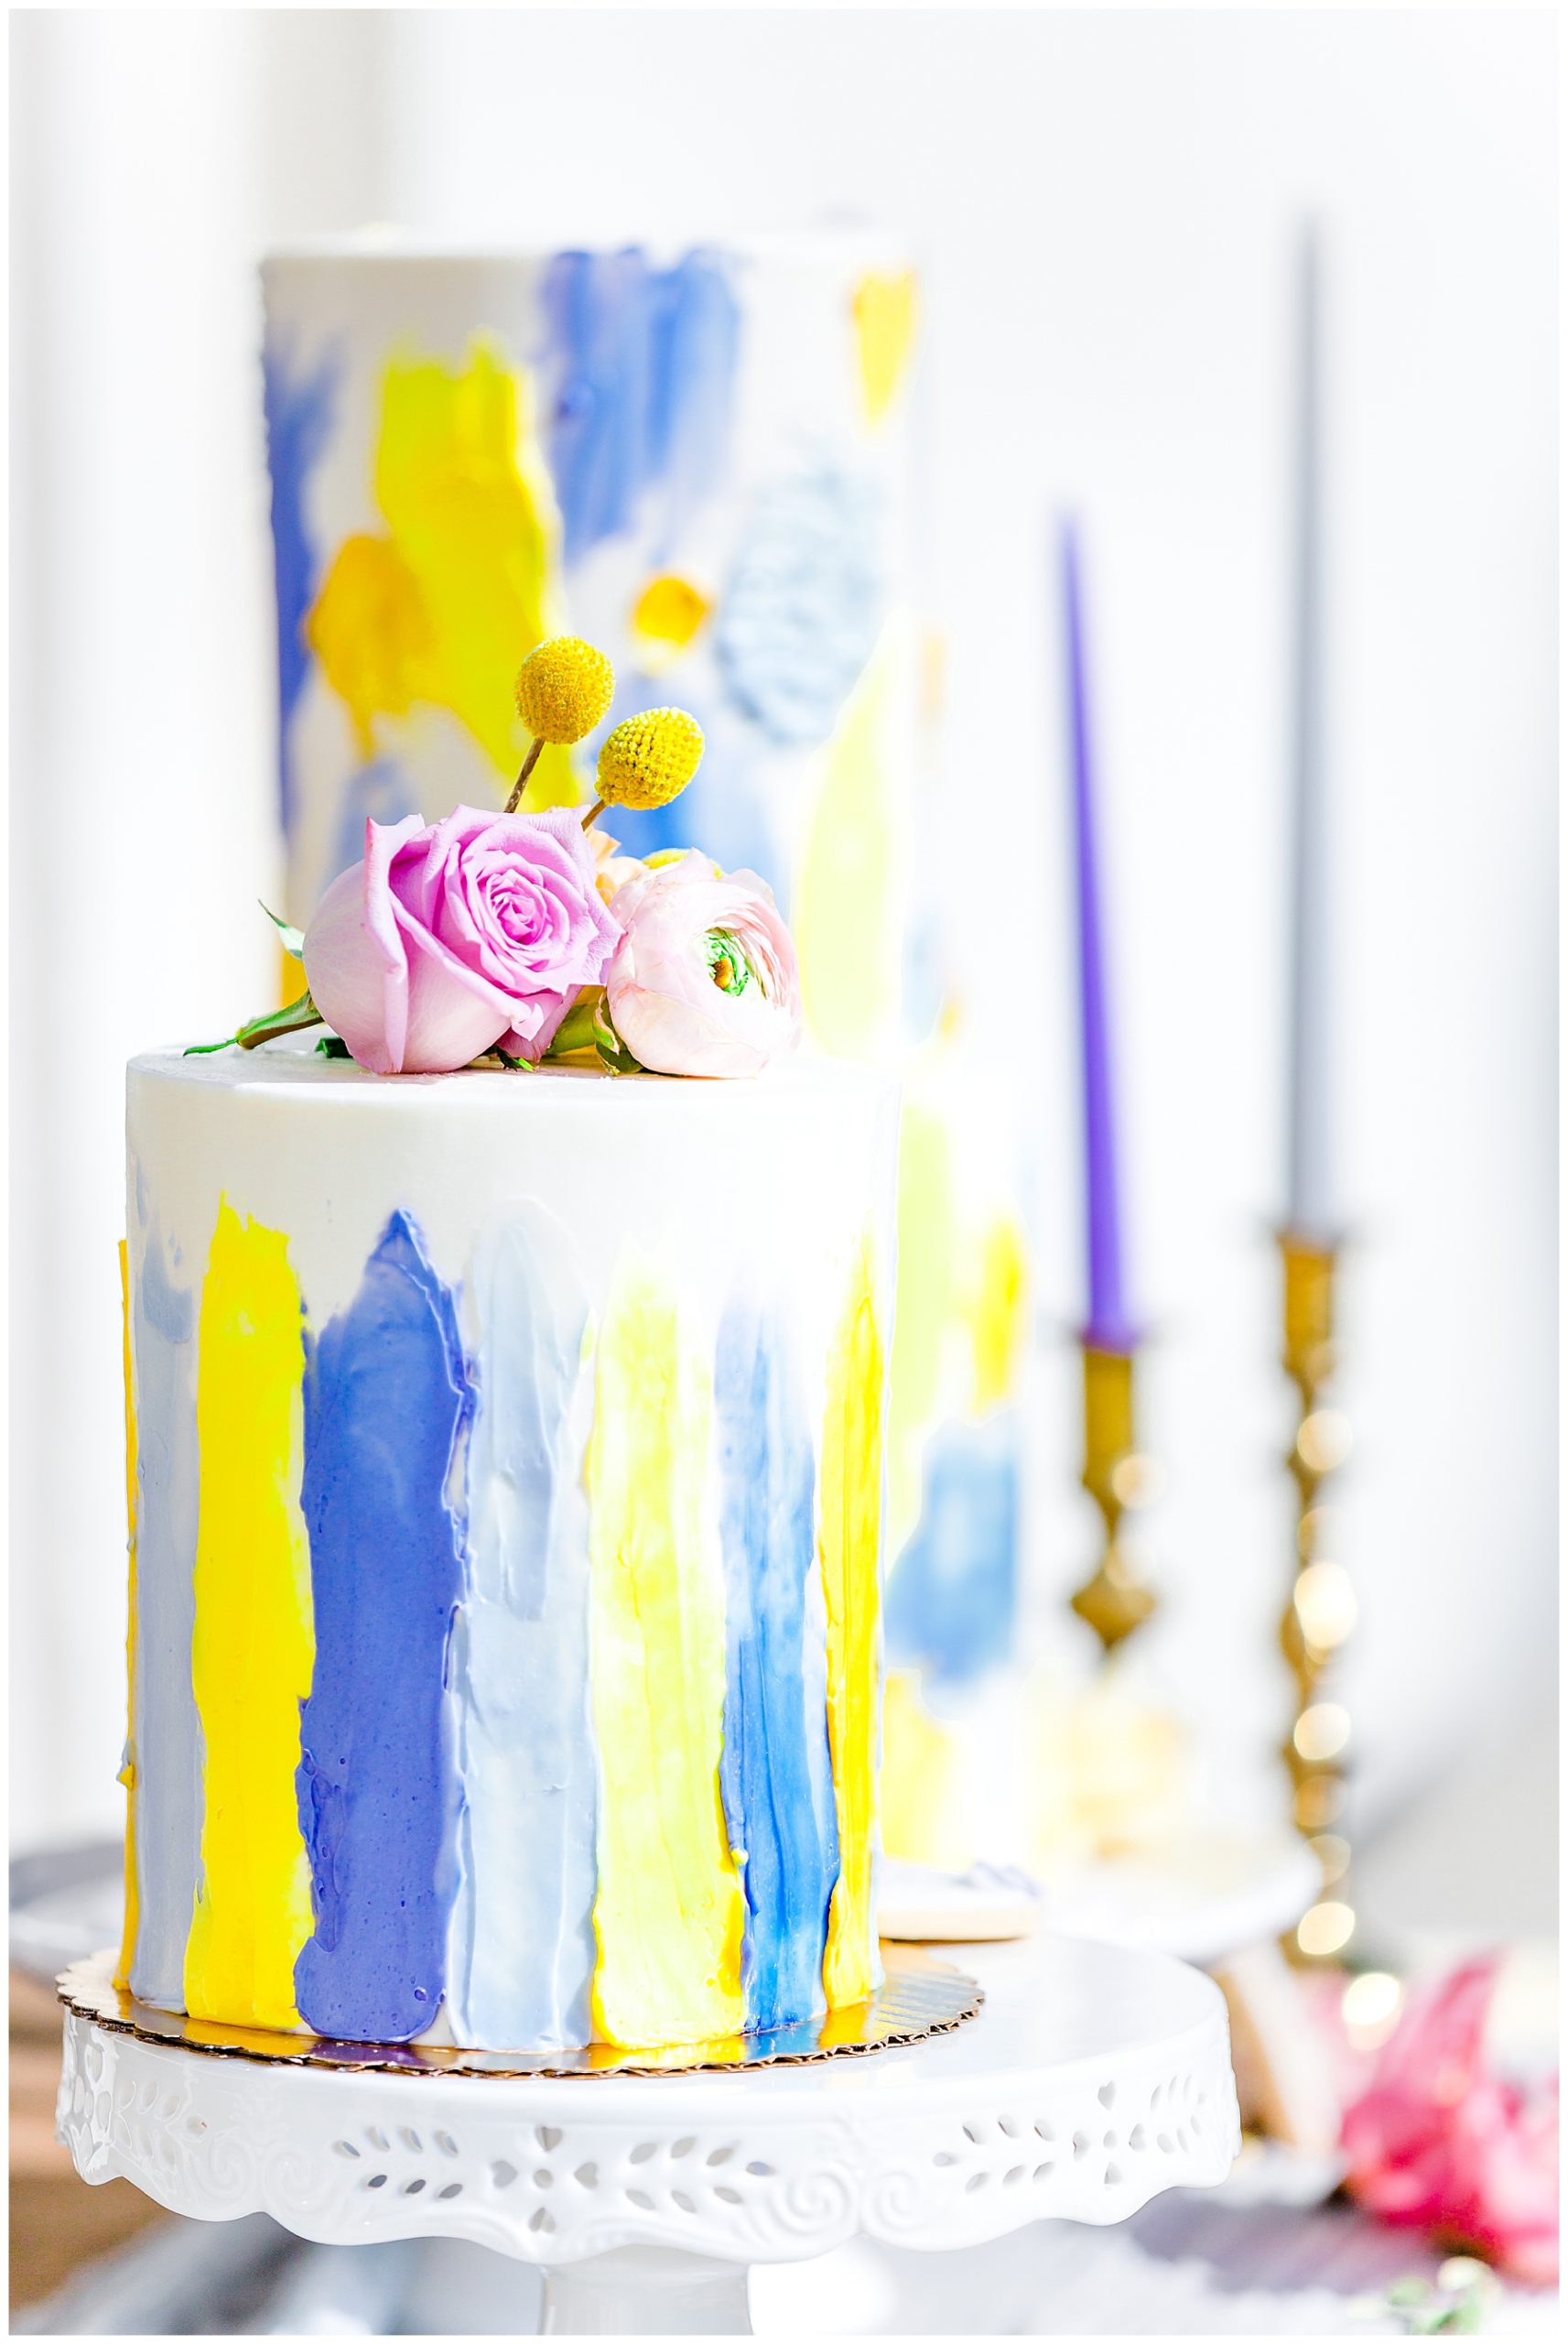 Wadsworth Mansion Wedding cake in yellow and blue